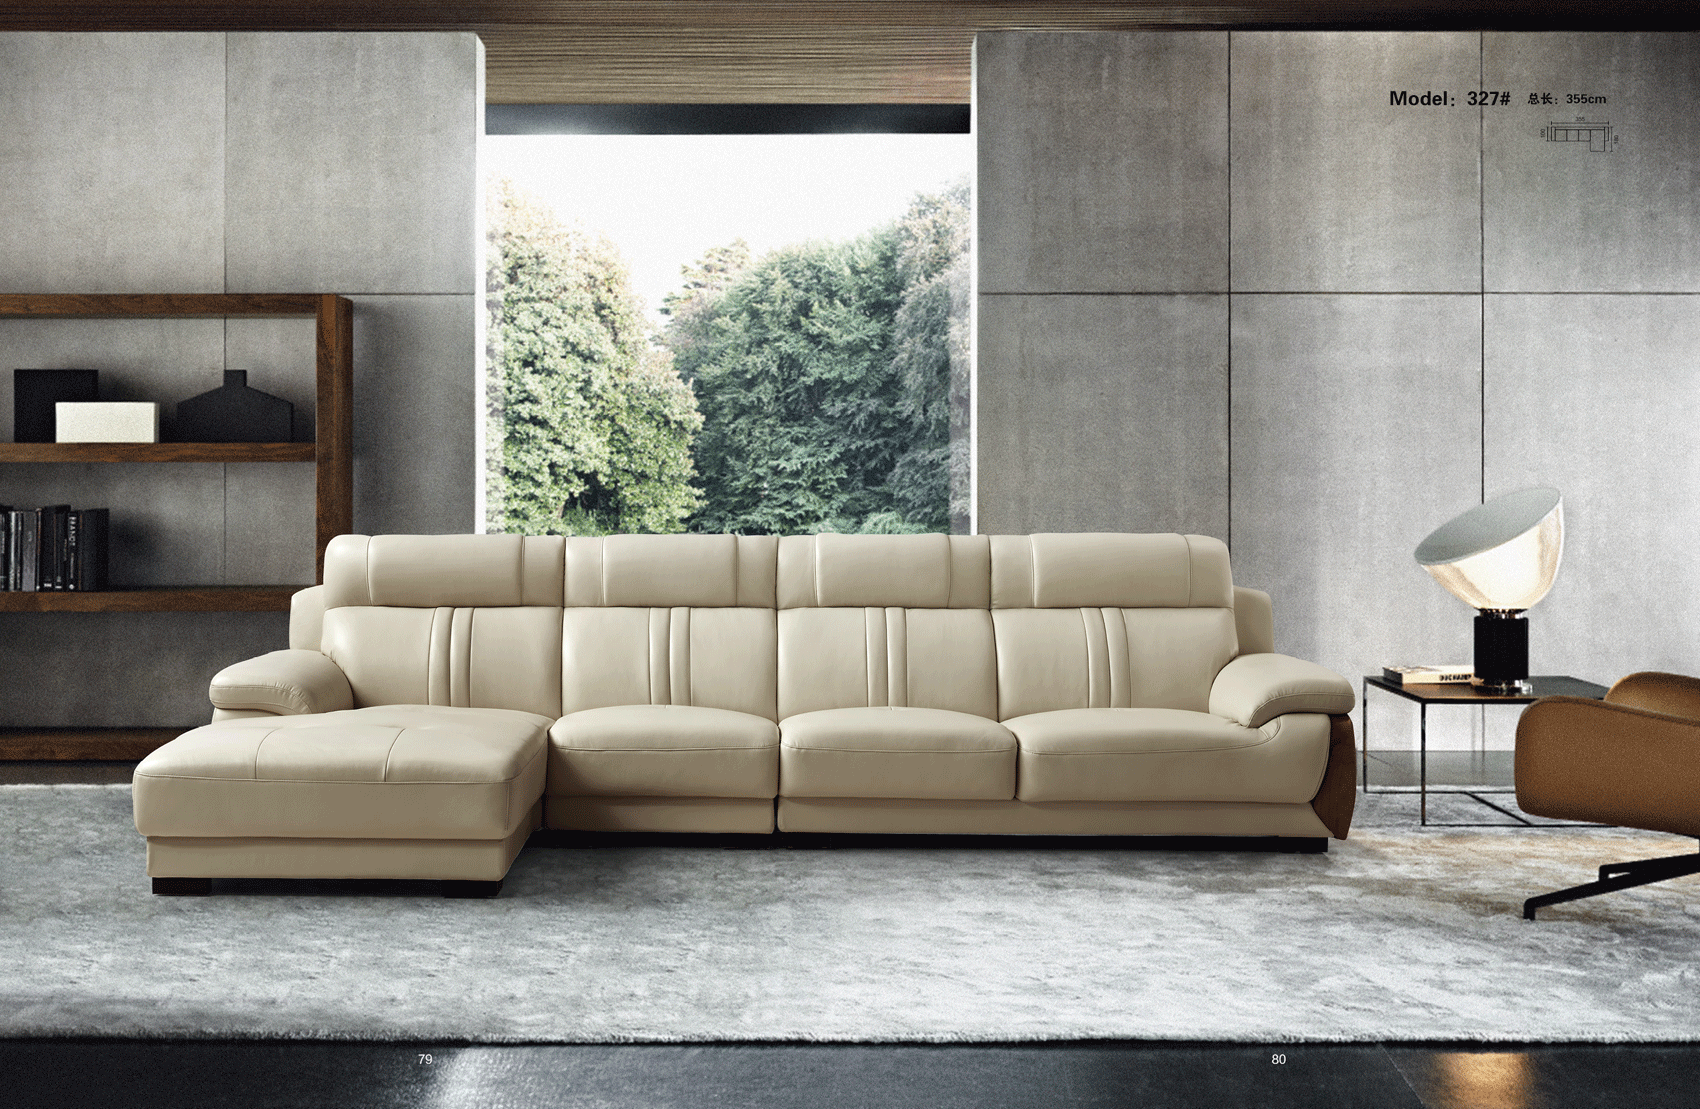 Living Room Furniture Sleepers Sofas Loveseats and Chairs 327 Sectional